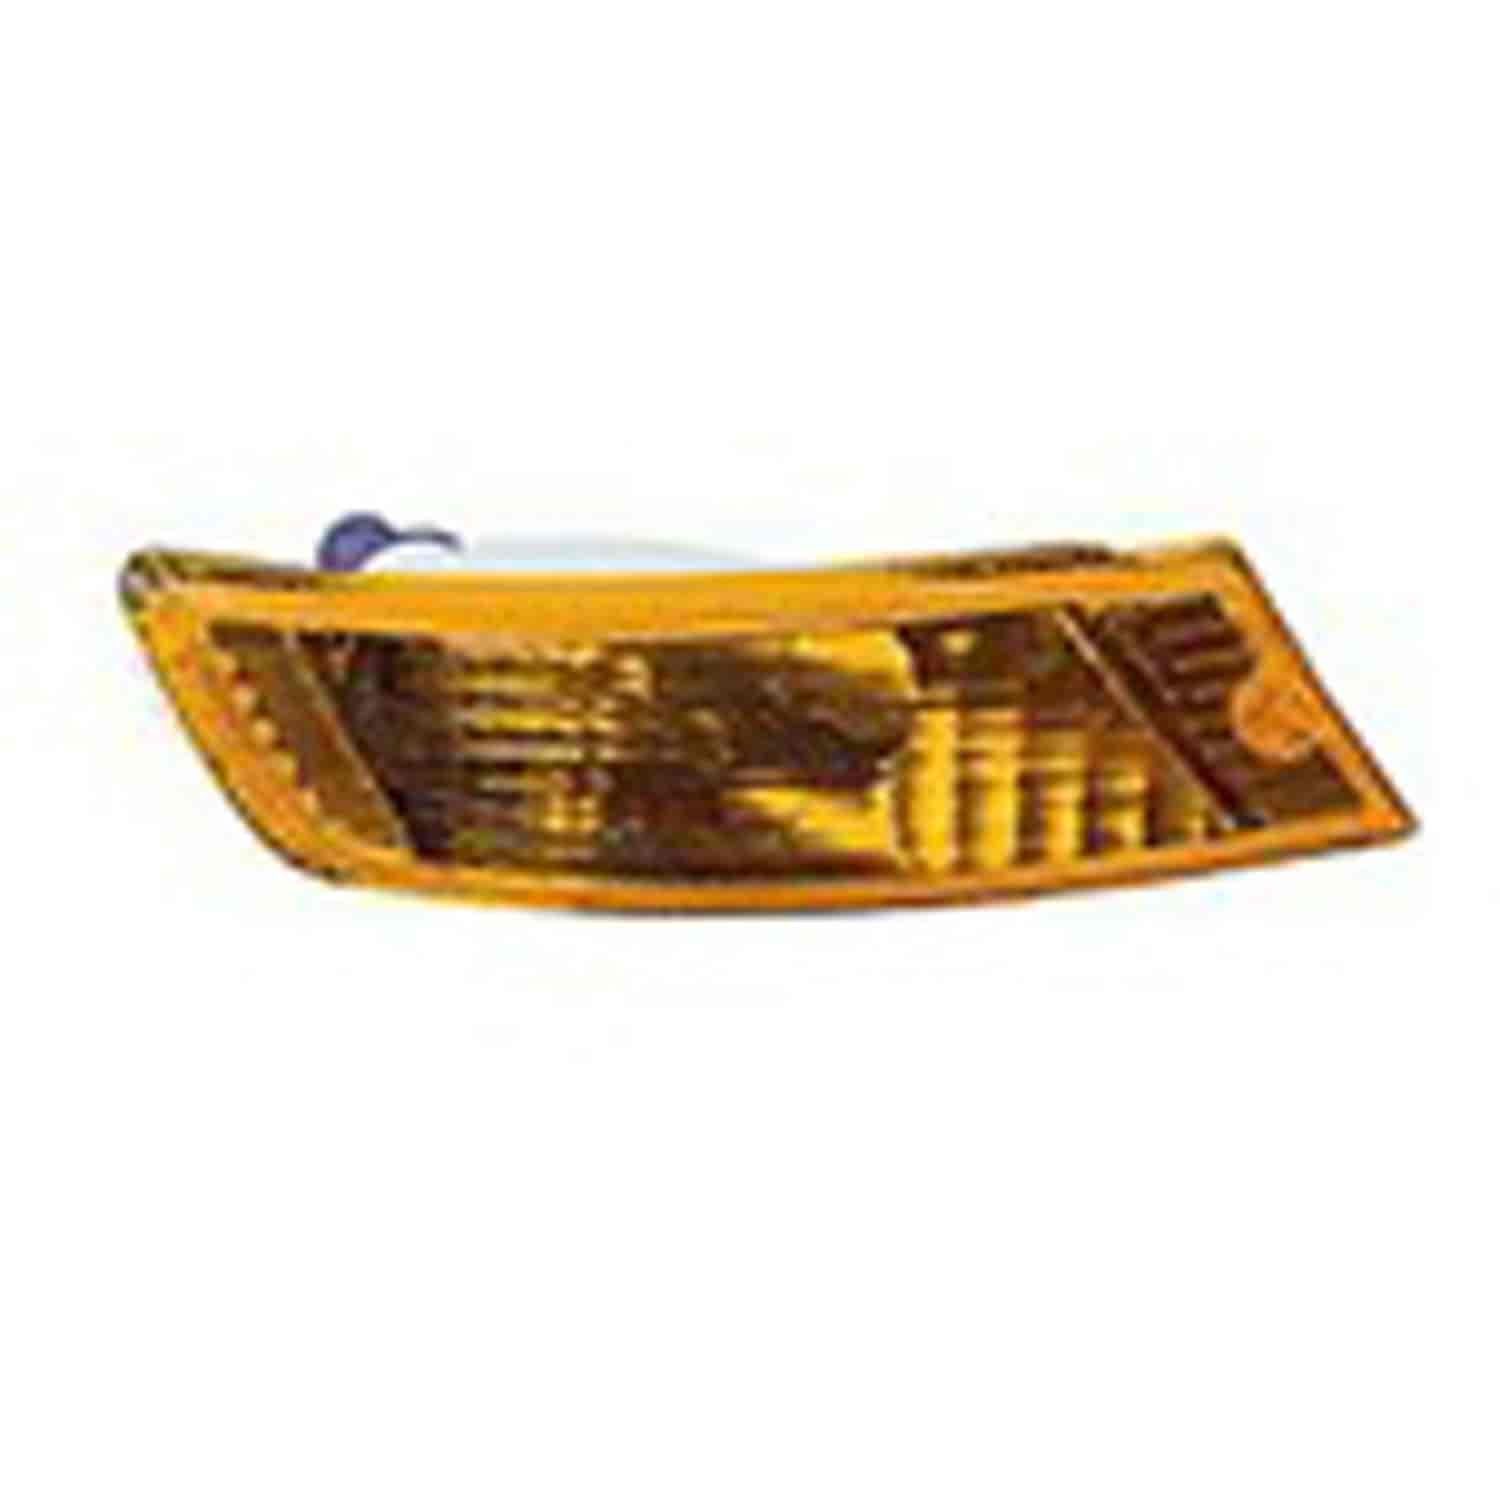 This amber park / turn signal lens from Omix-ADA fits the right side of 05-07 Jeep Liberty KJ.